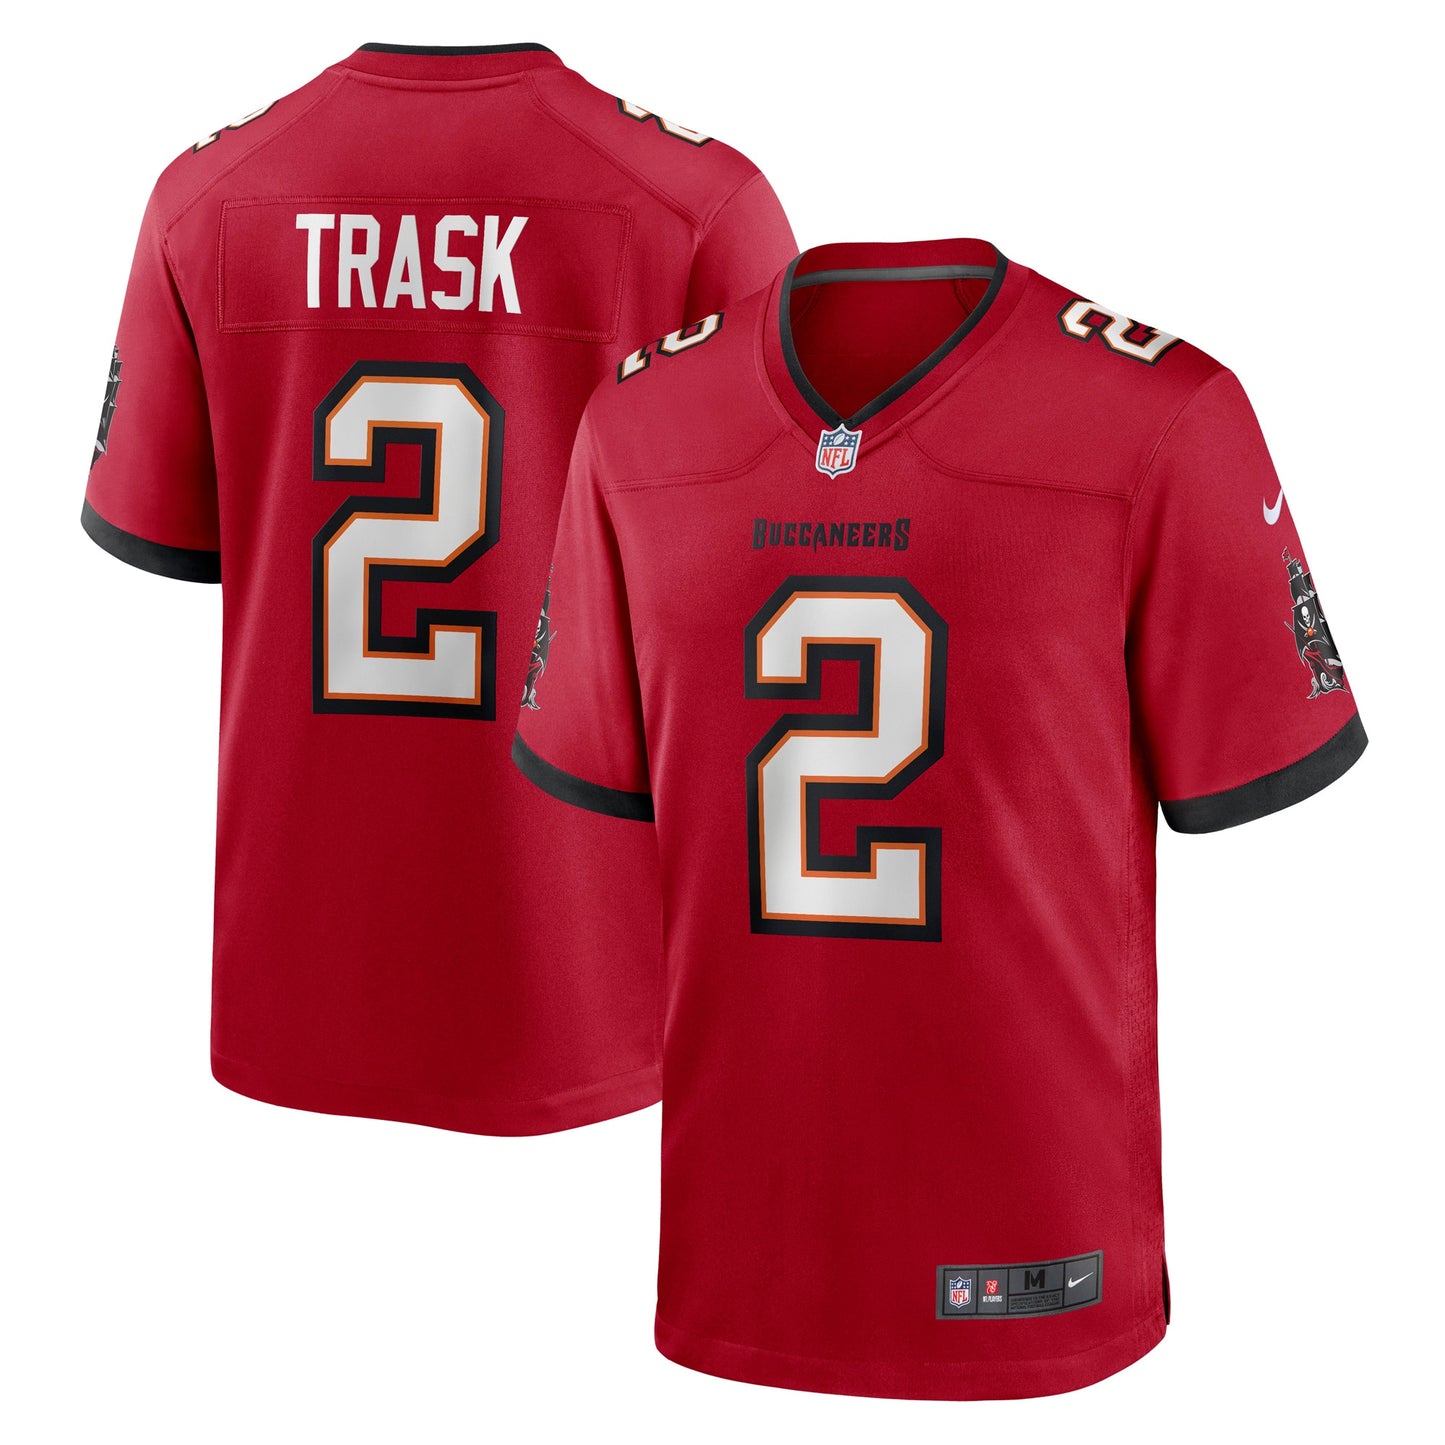 Kyle Trask Tampa Bay Buccaneers Nike Game Jersey - Red